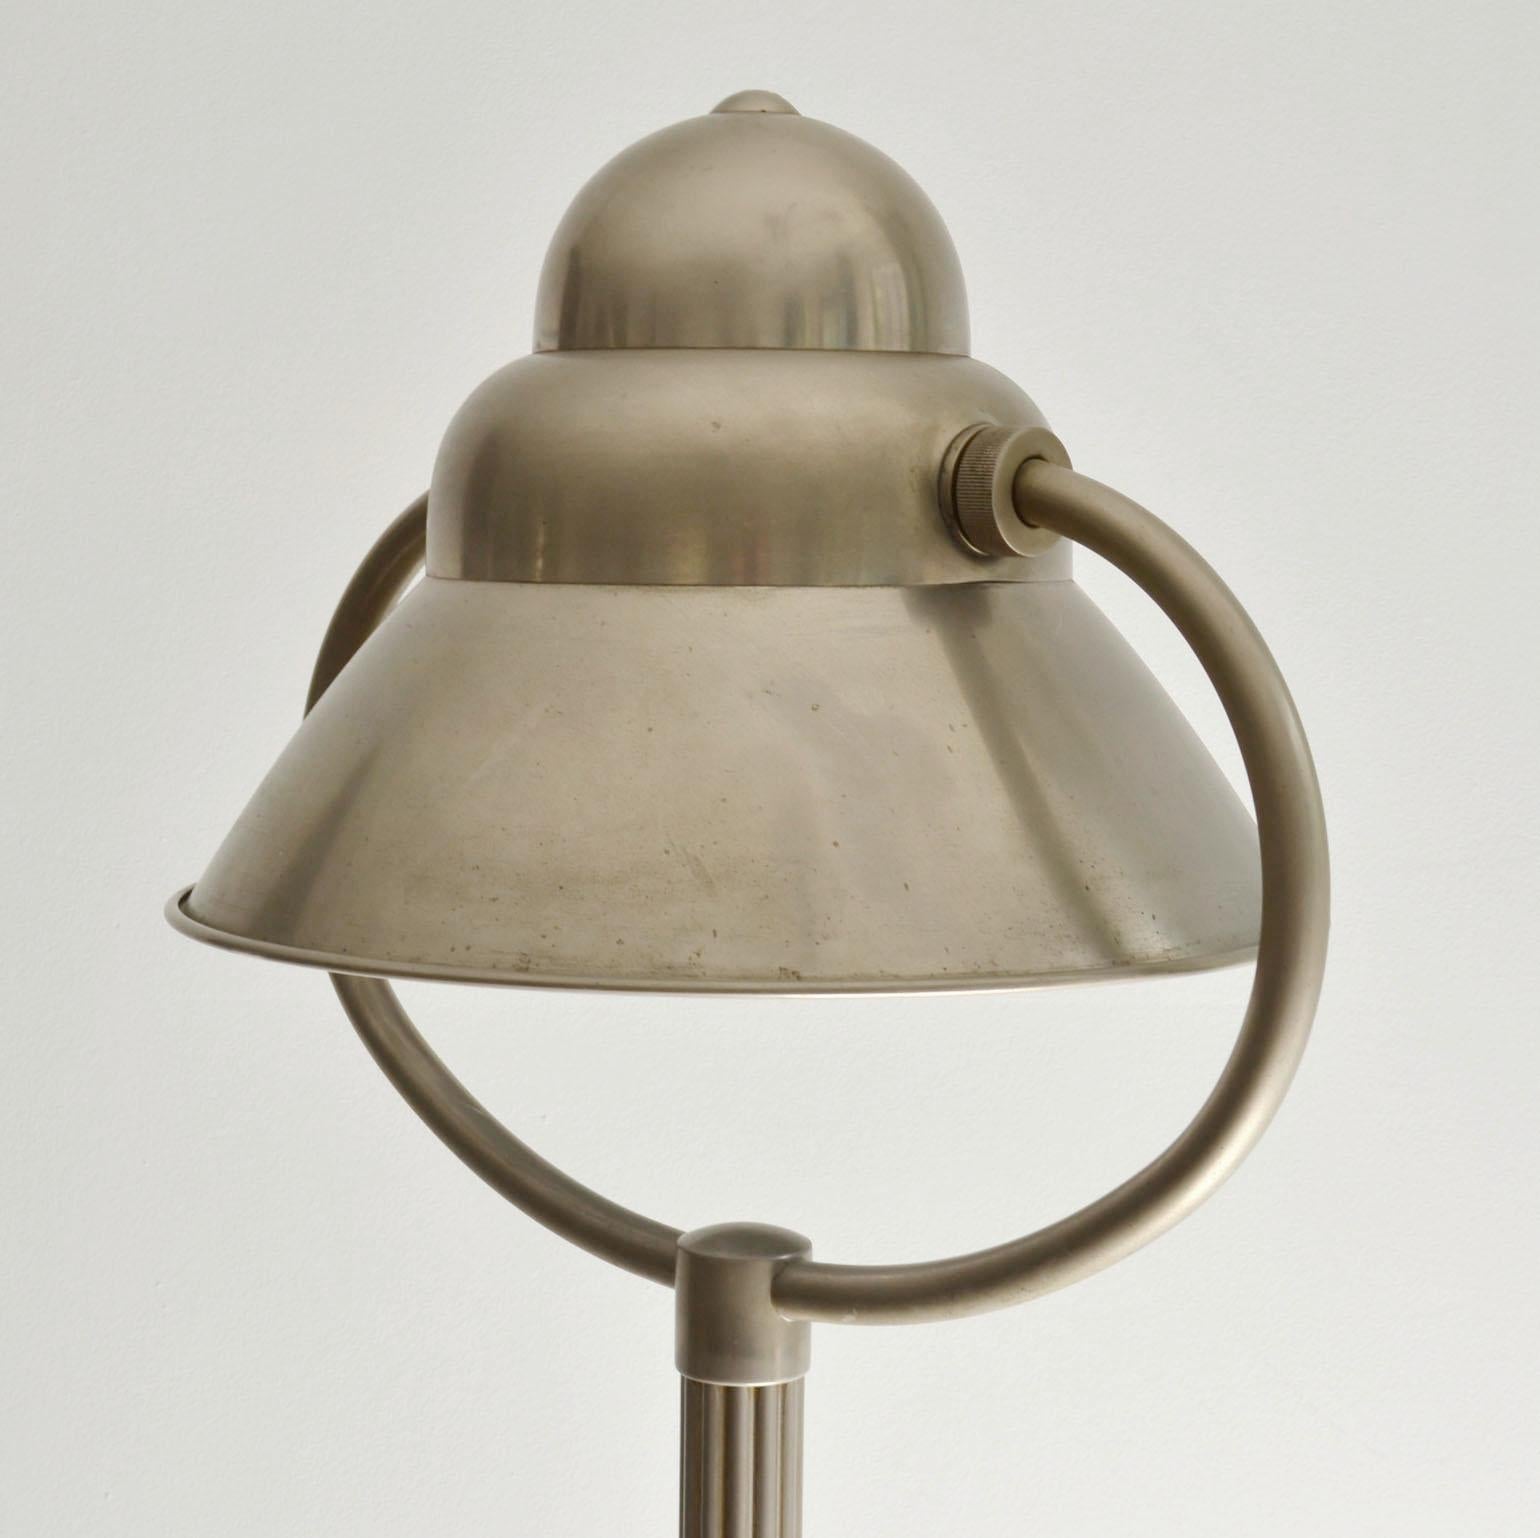 Early 20th Century Art Deco Floor Lamp 1920's with Adjustable Shade in Nickel Attributed to Gispen  For Sale